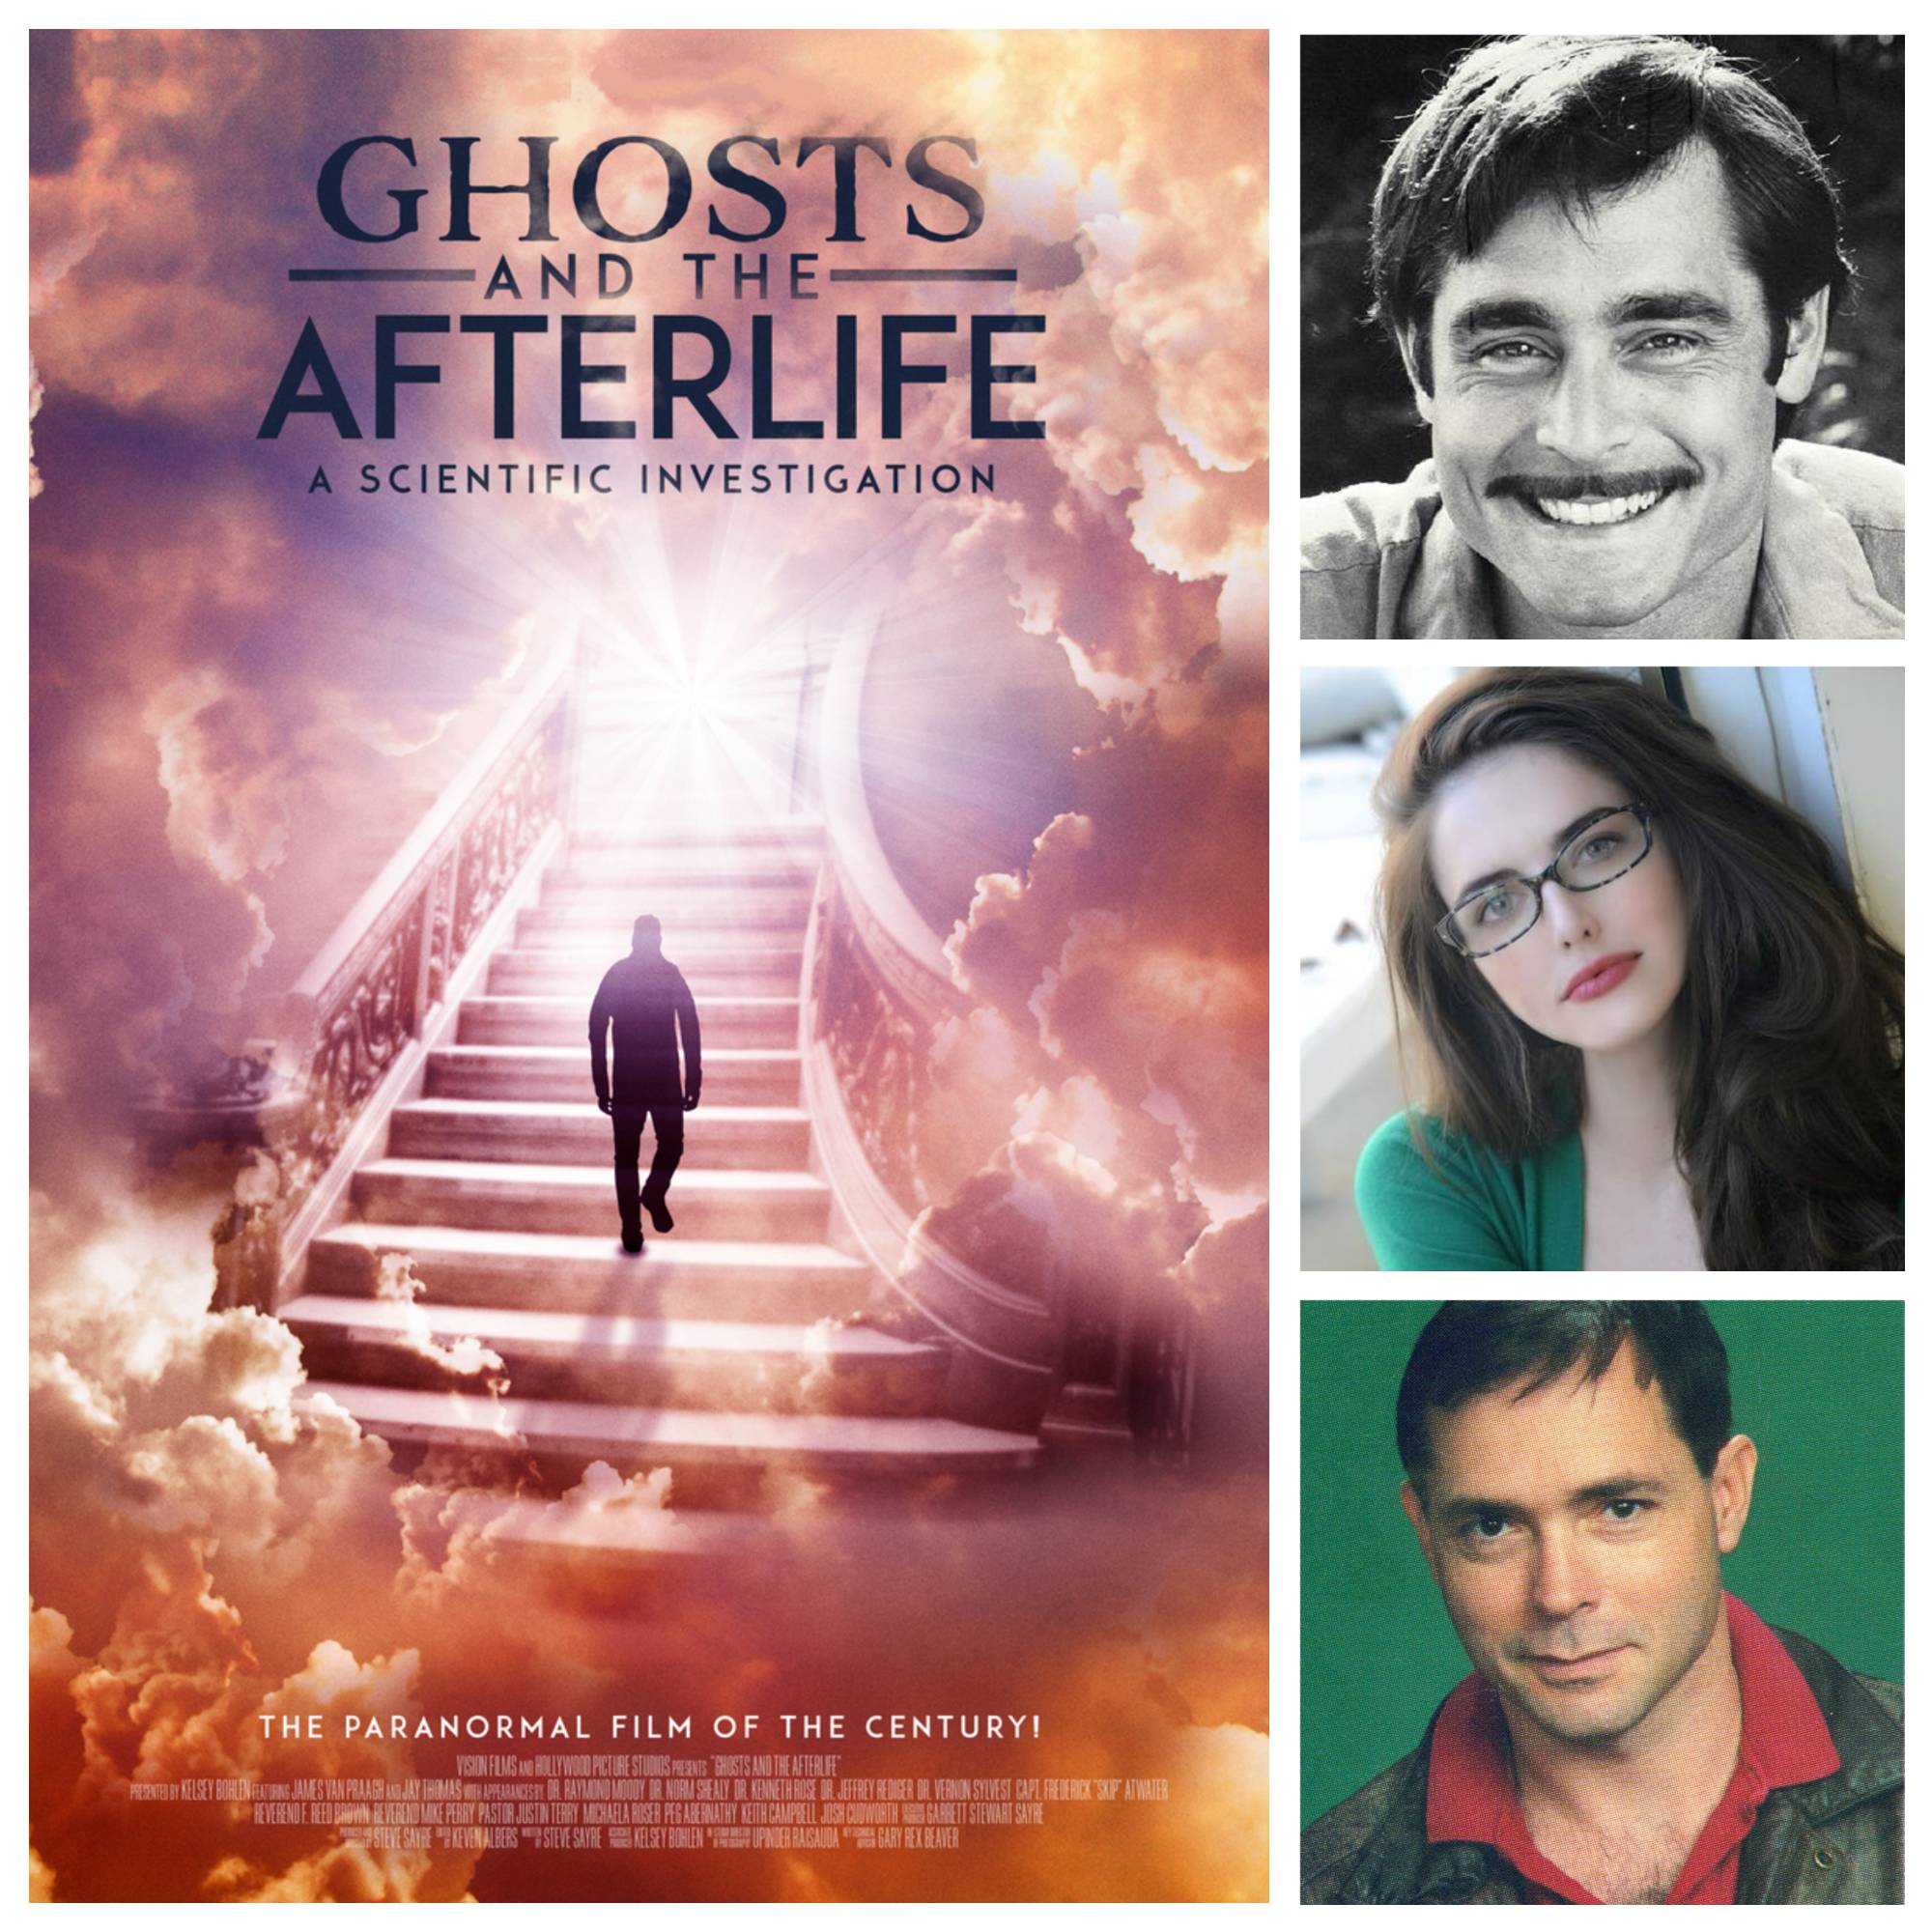 Steve Sayre, former Top-Secret U.S. Army Intelligence Operative, Directs  new Hit Docufilm “Ghosts and the Afterlife”